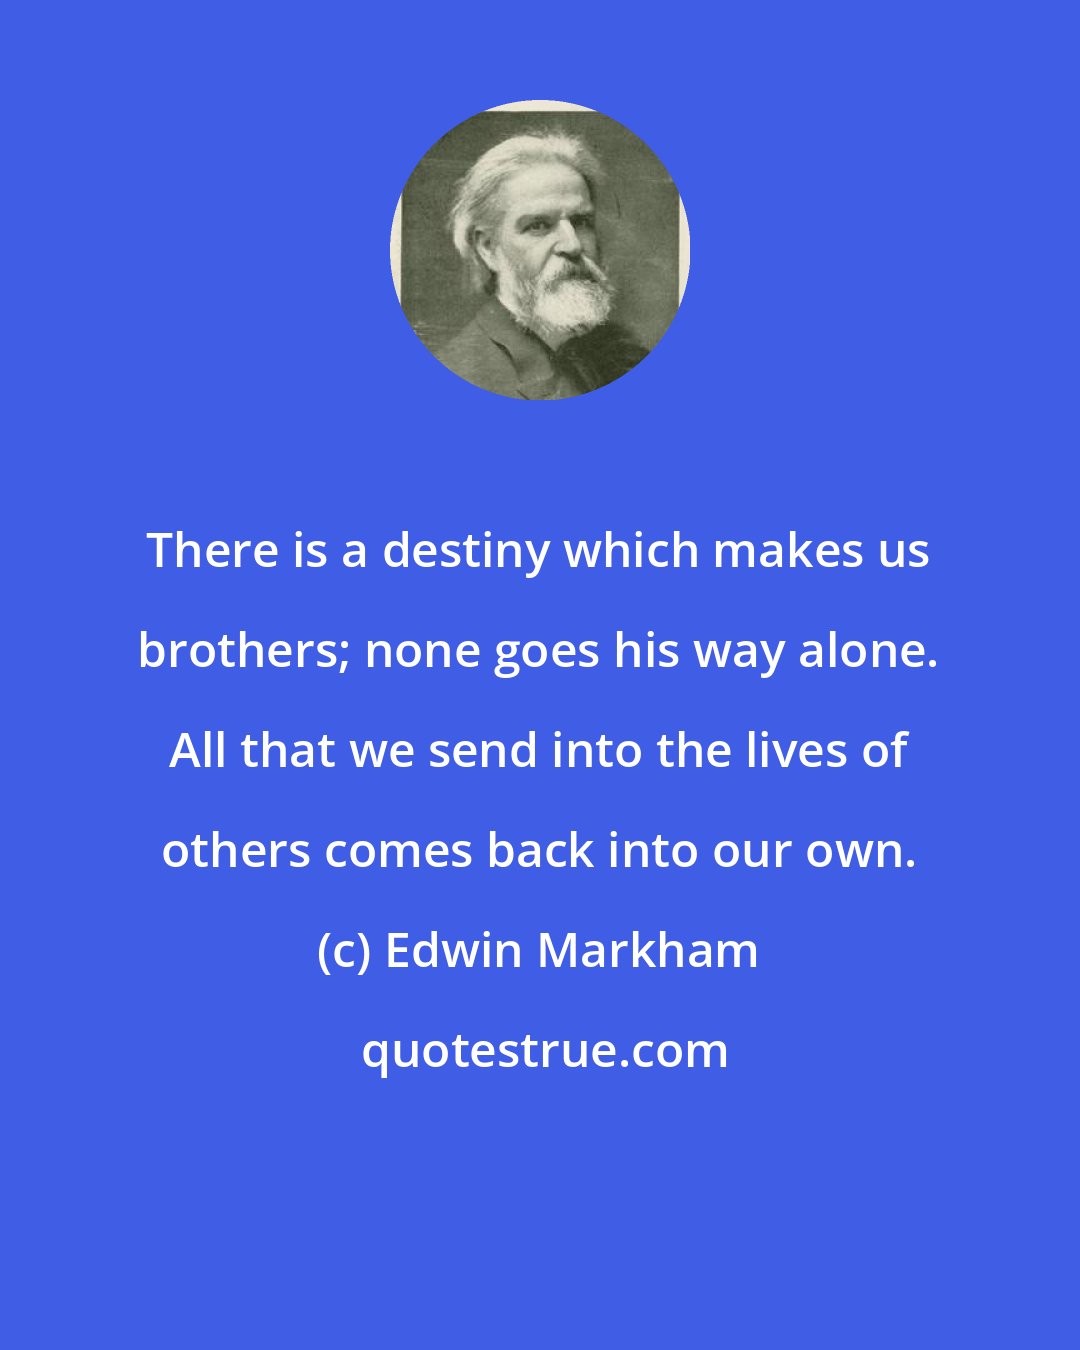 Edwin Markham: There is a destiny which makes us brothers; none goes his way alone. All that we send into the lives of others comes back into our own.